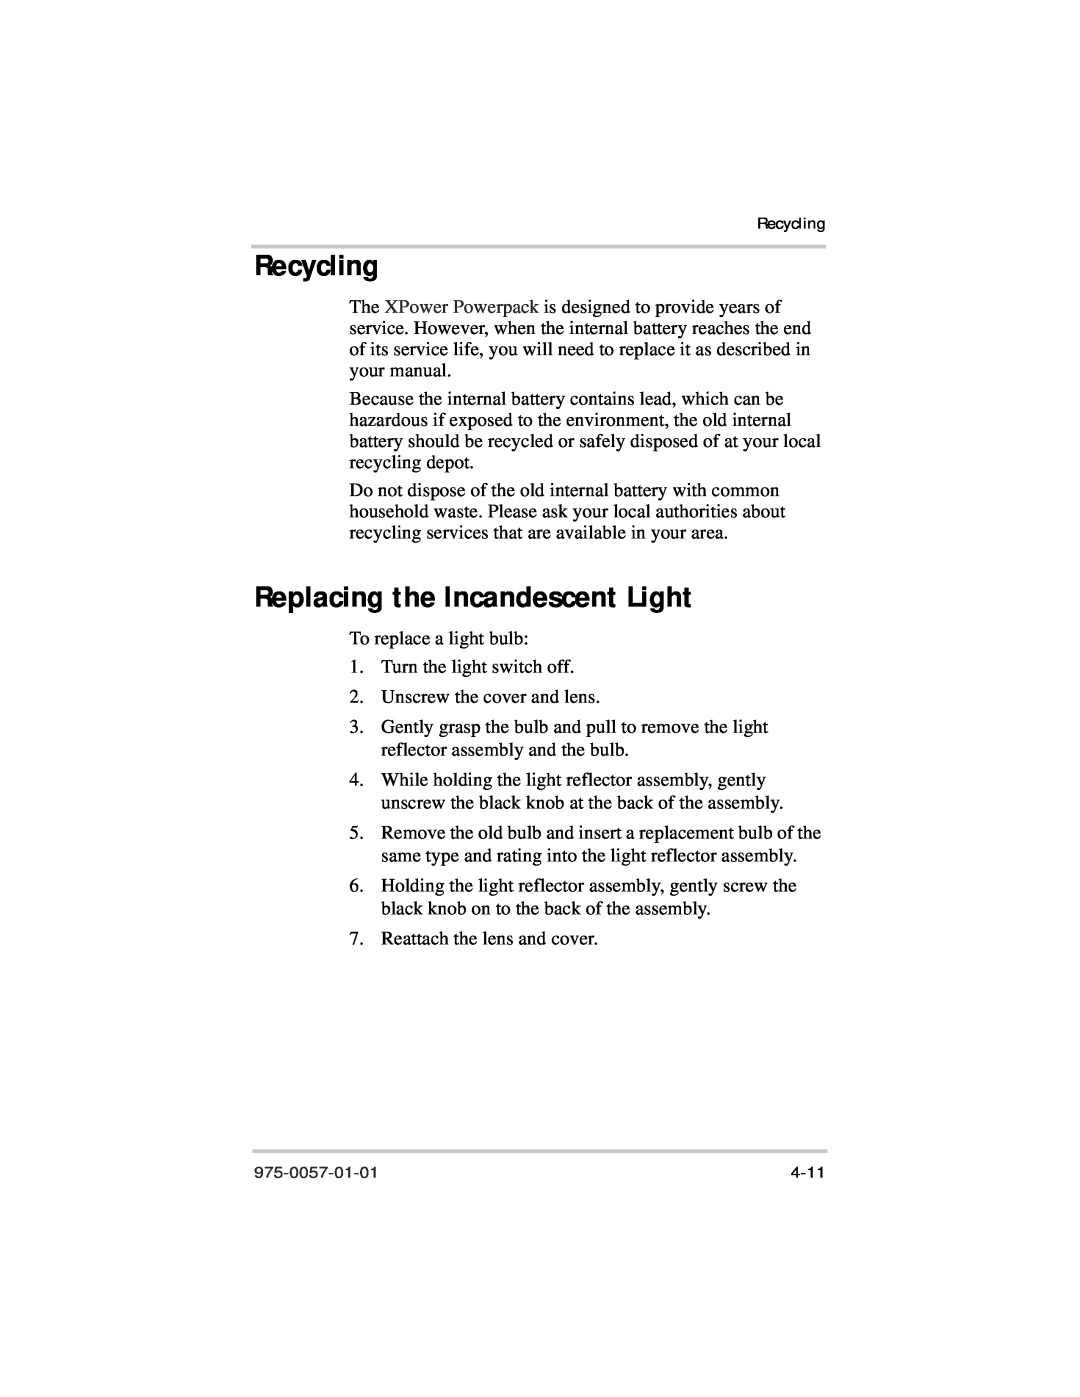 Xantrex Technology 975-0057-01-01 warranty Recycling, Replacing the Incandescent Light 